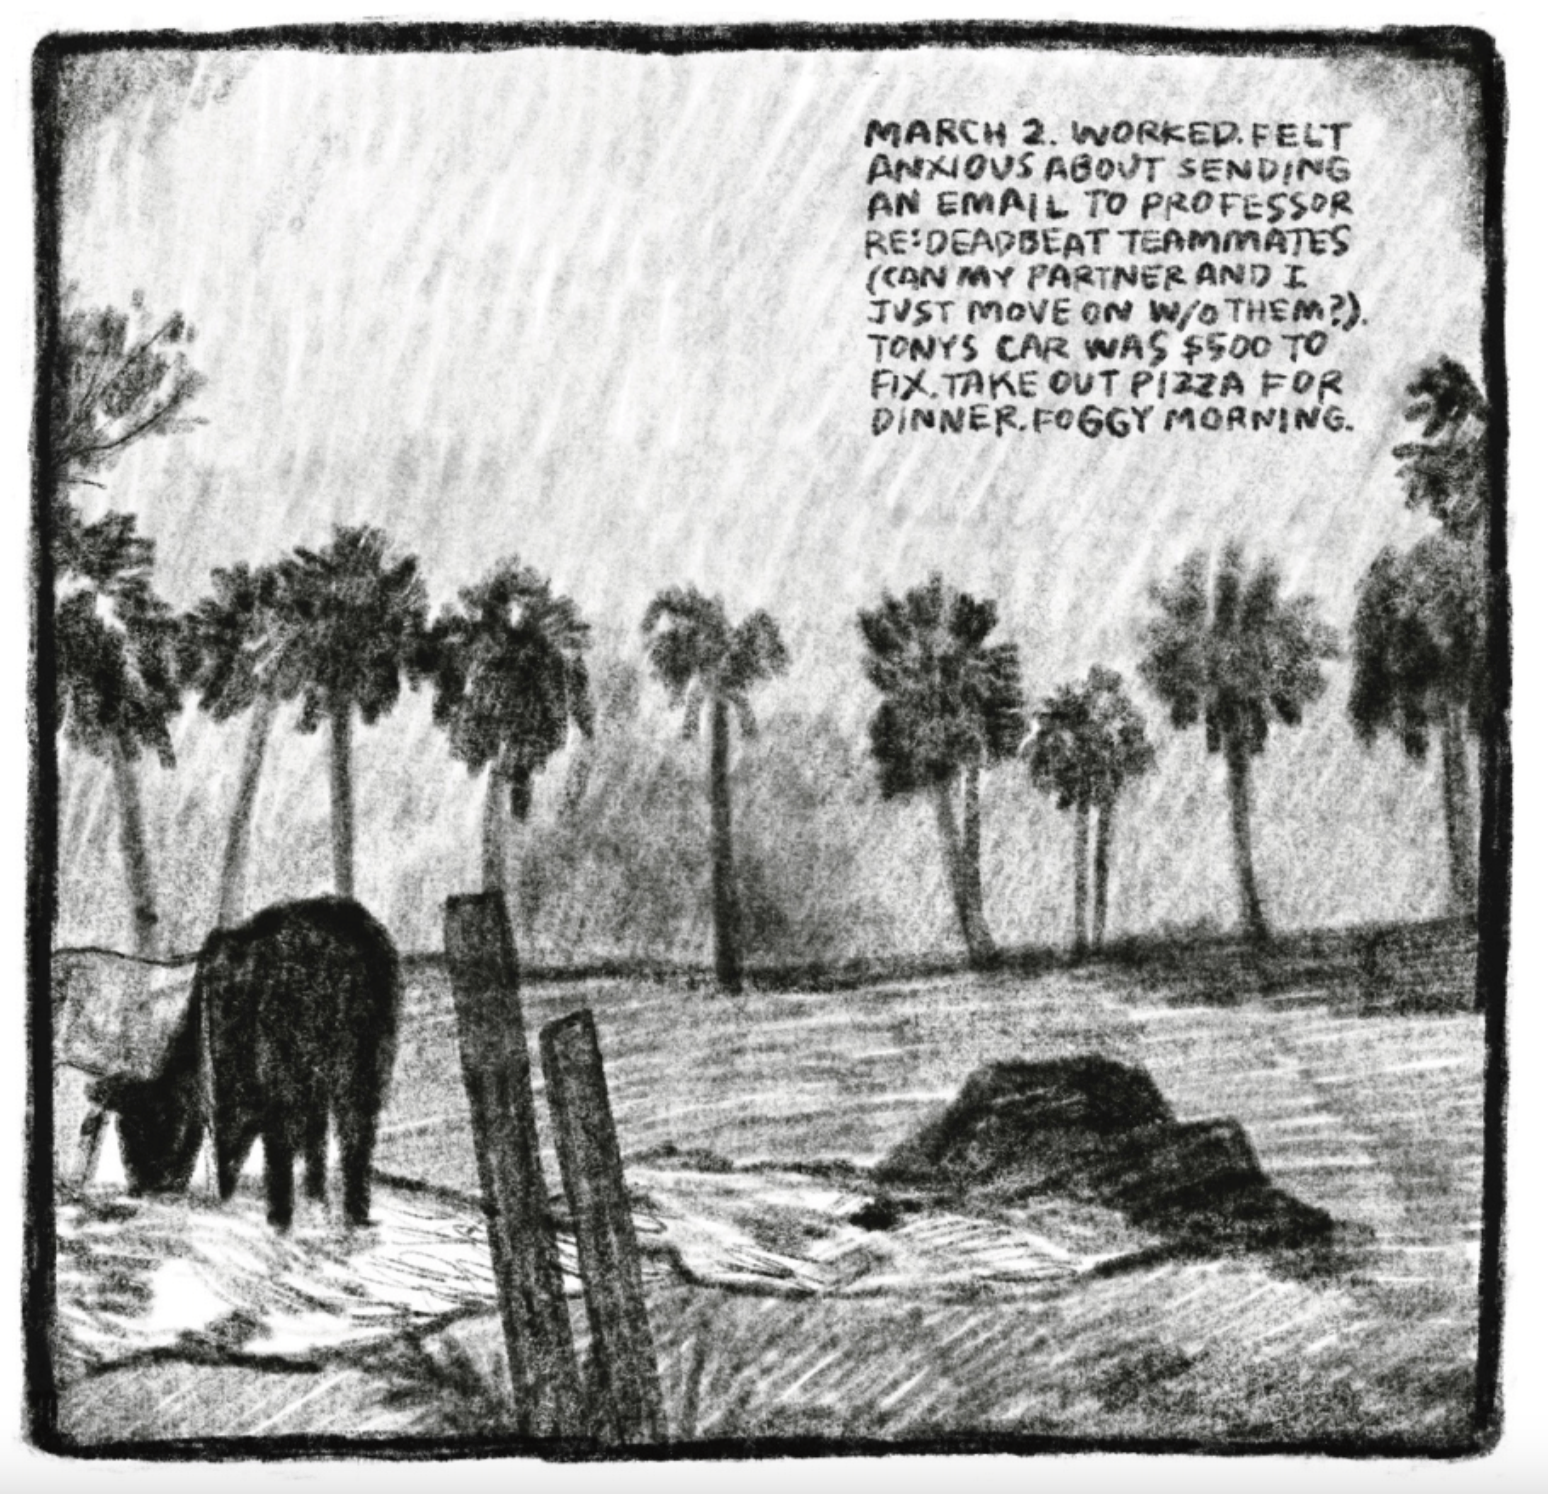 Panel 2
Palm trees in the distance and a cow/buffalo-like animal grazing in the foreground.
Upper right corner reads: "MARCH 2. WORKED. FELT ANXIOUS ABOUT SENDING AN EMAIL TO PROFESSOR RE:DEADBEAT TEAMMATES (CAN MY PARTNER AND I JUST MOVE ON W/O THEM?). TONYS CAR WAS $500 TO FIX. TAKE OUT PIZZA FOR DINNER. FOGGY MORNING."